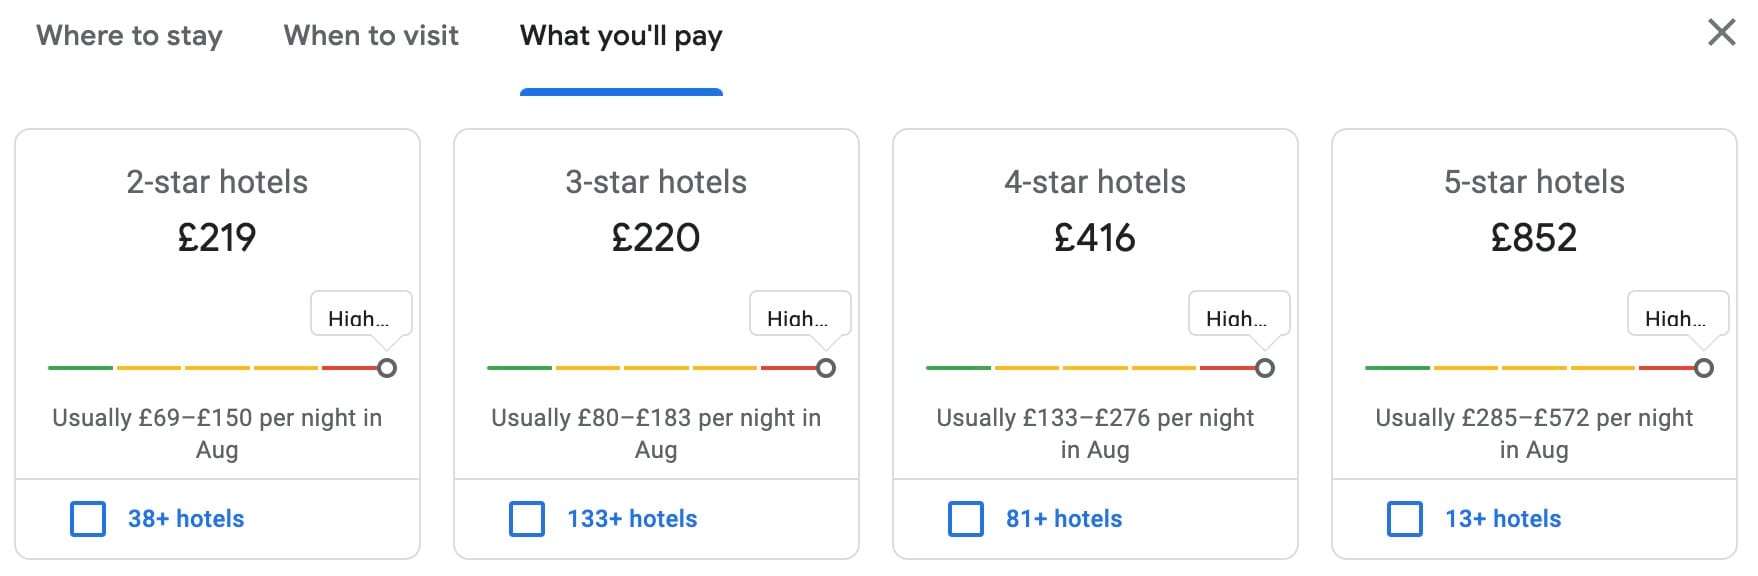 Paris Hotel Prices Surge 92.4% for the Olympics: A Comprehensive Analysis